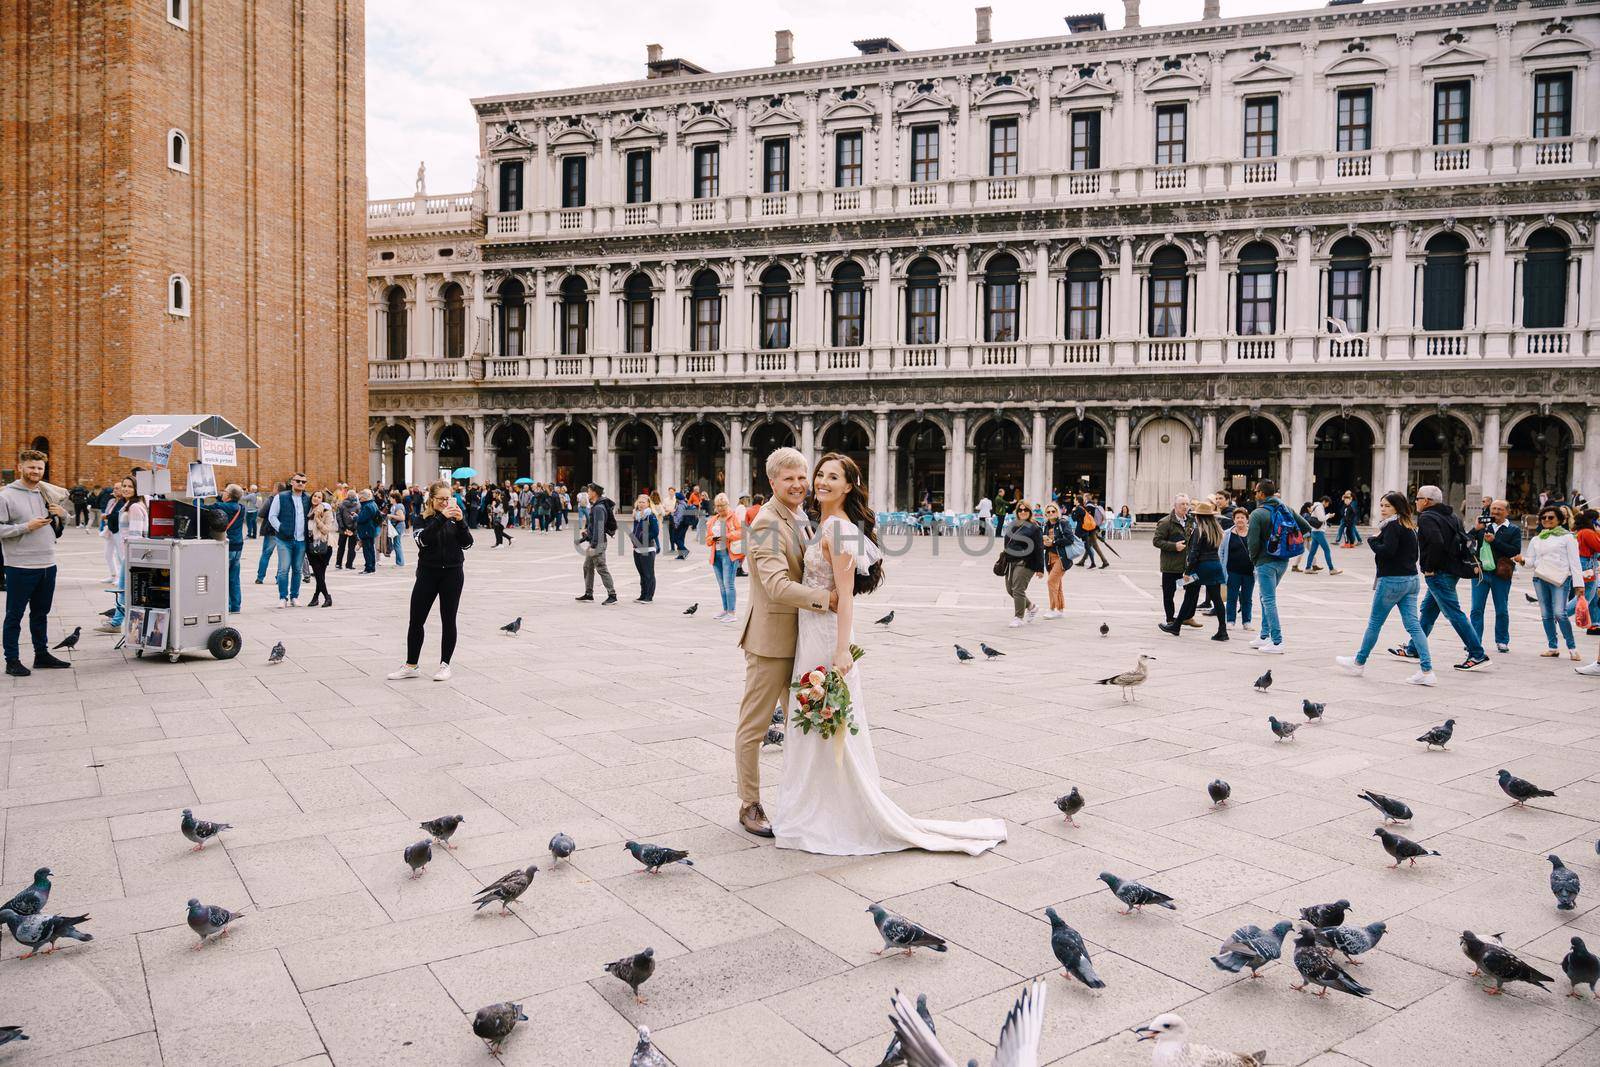 Venice, Italy - 04 october 2019: Wedding in Venice, Italy. Bride and groom are looking at camera among the pigeons in Piazza San Marco, against backdrop of the National Archaeological Museum Venice by Nadtochiy